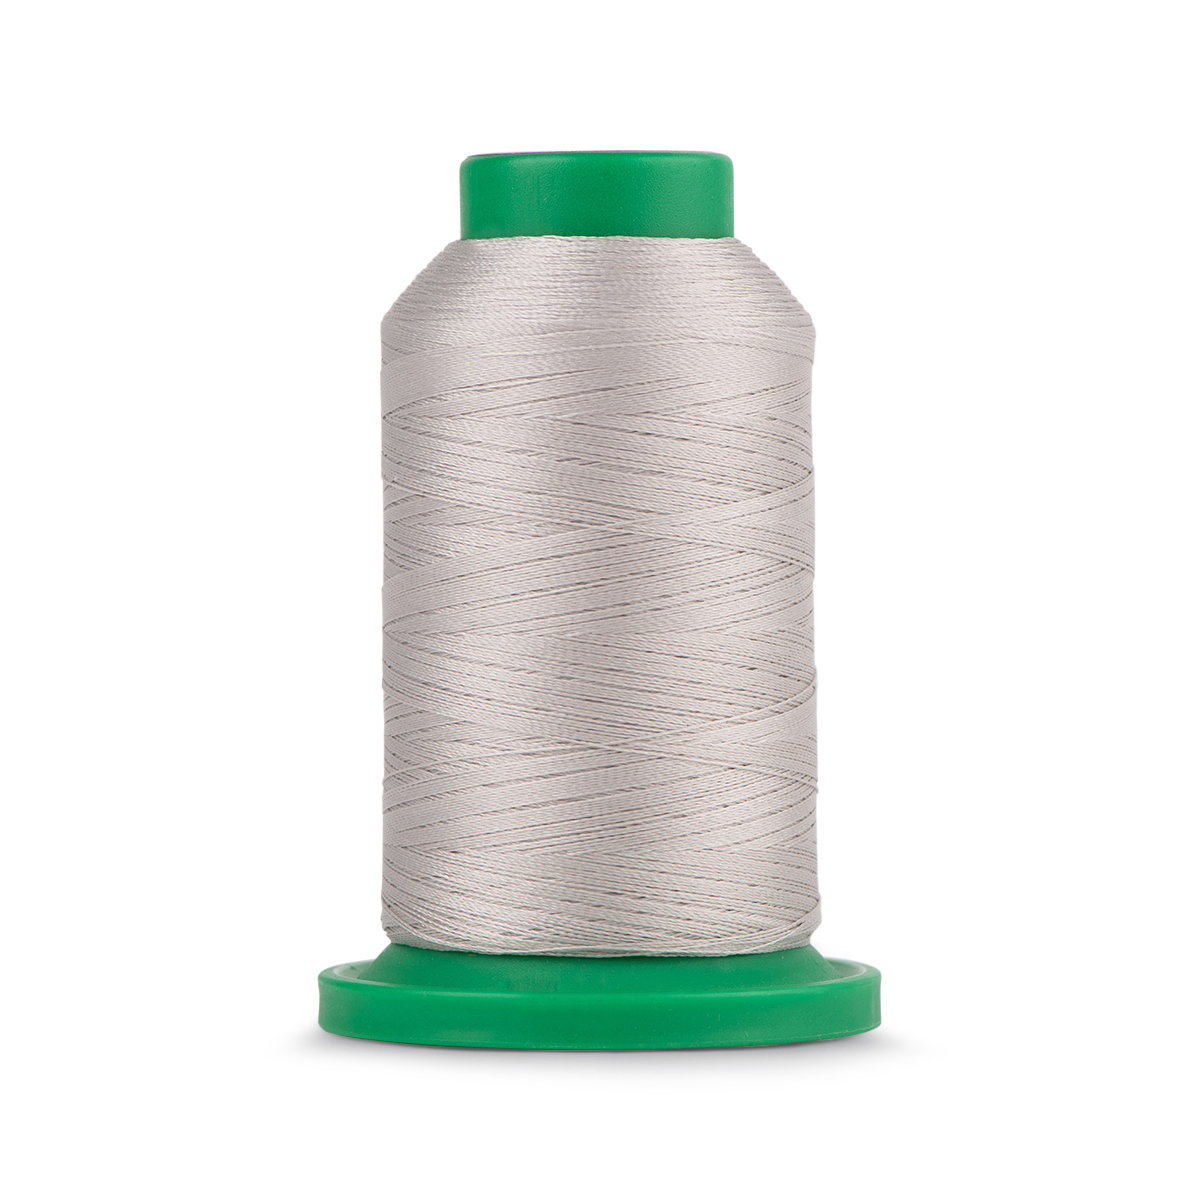 3331 - CADET BLUE - ISACORD EMBROIDERY THREAD 40 WT – Embroidery Supply Shop